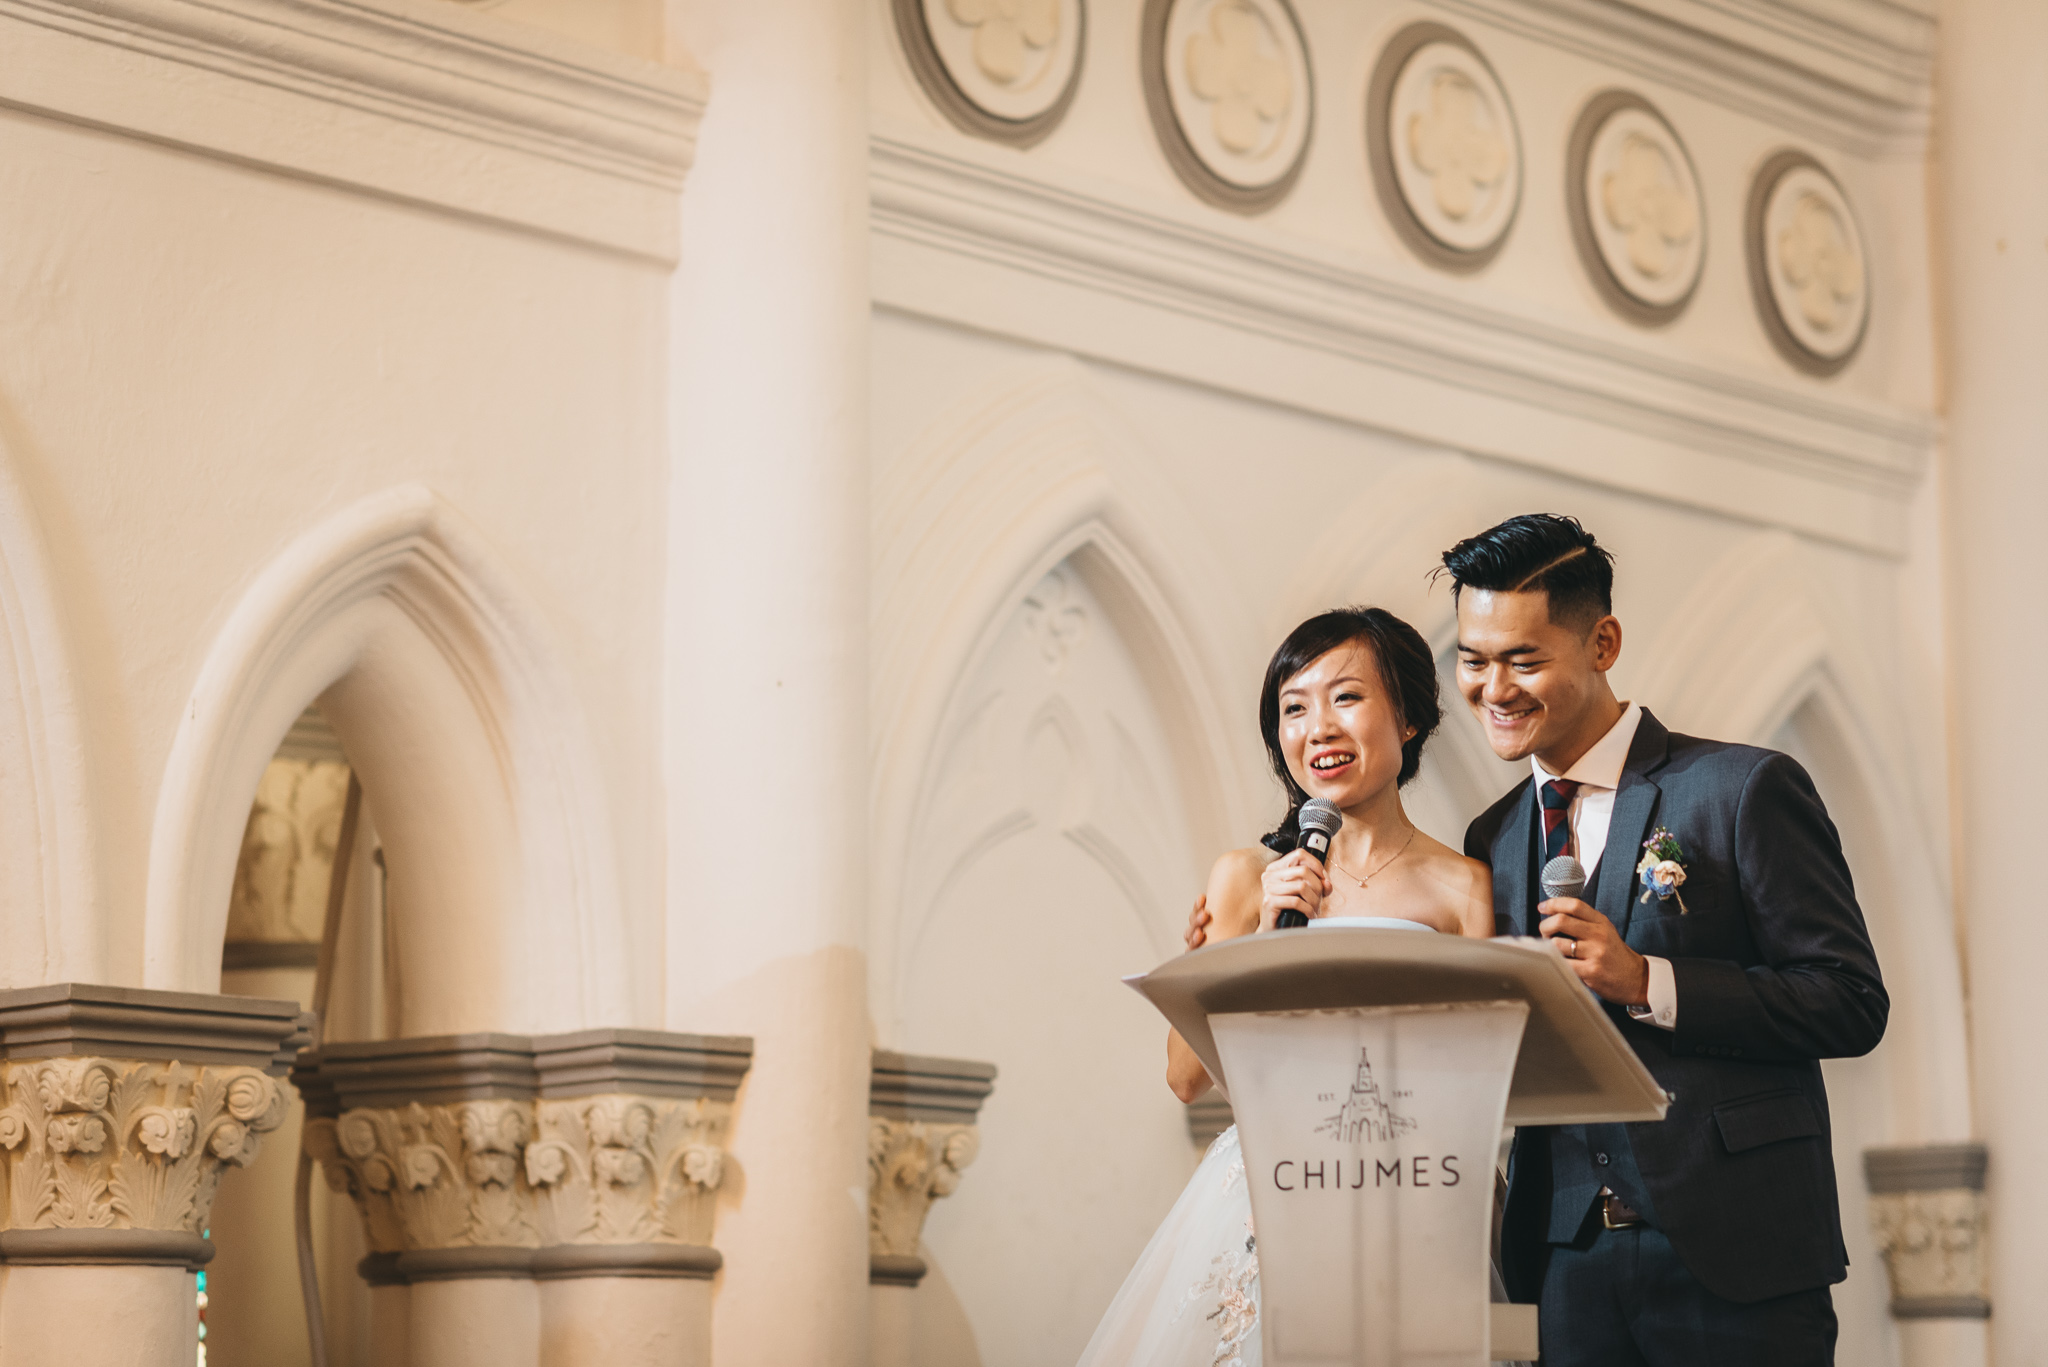 Alice & Wei Bang Wedding Day Highlights (resized for sharing) - 112.jpg